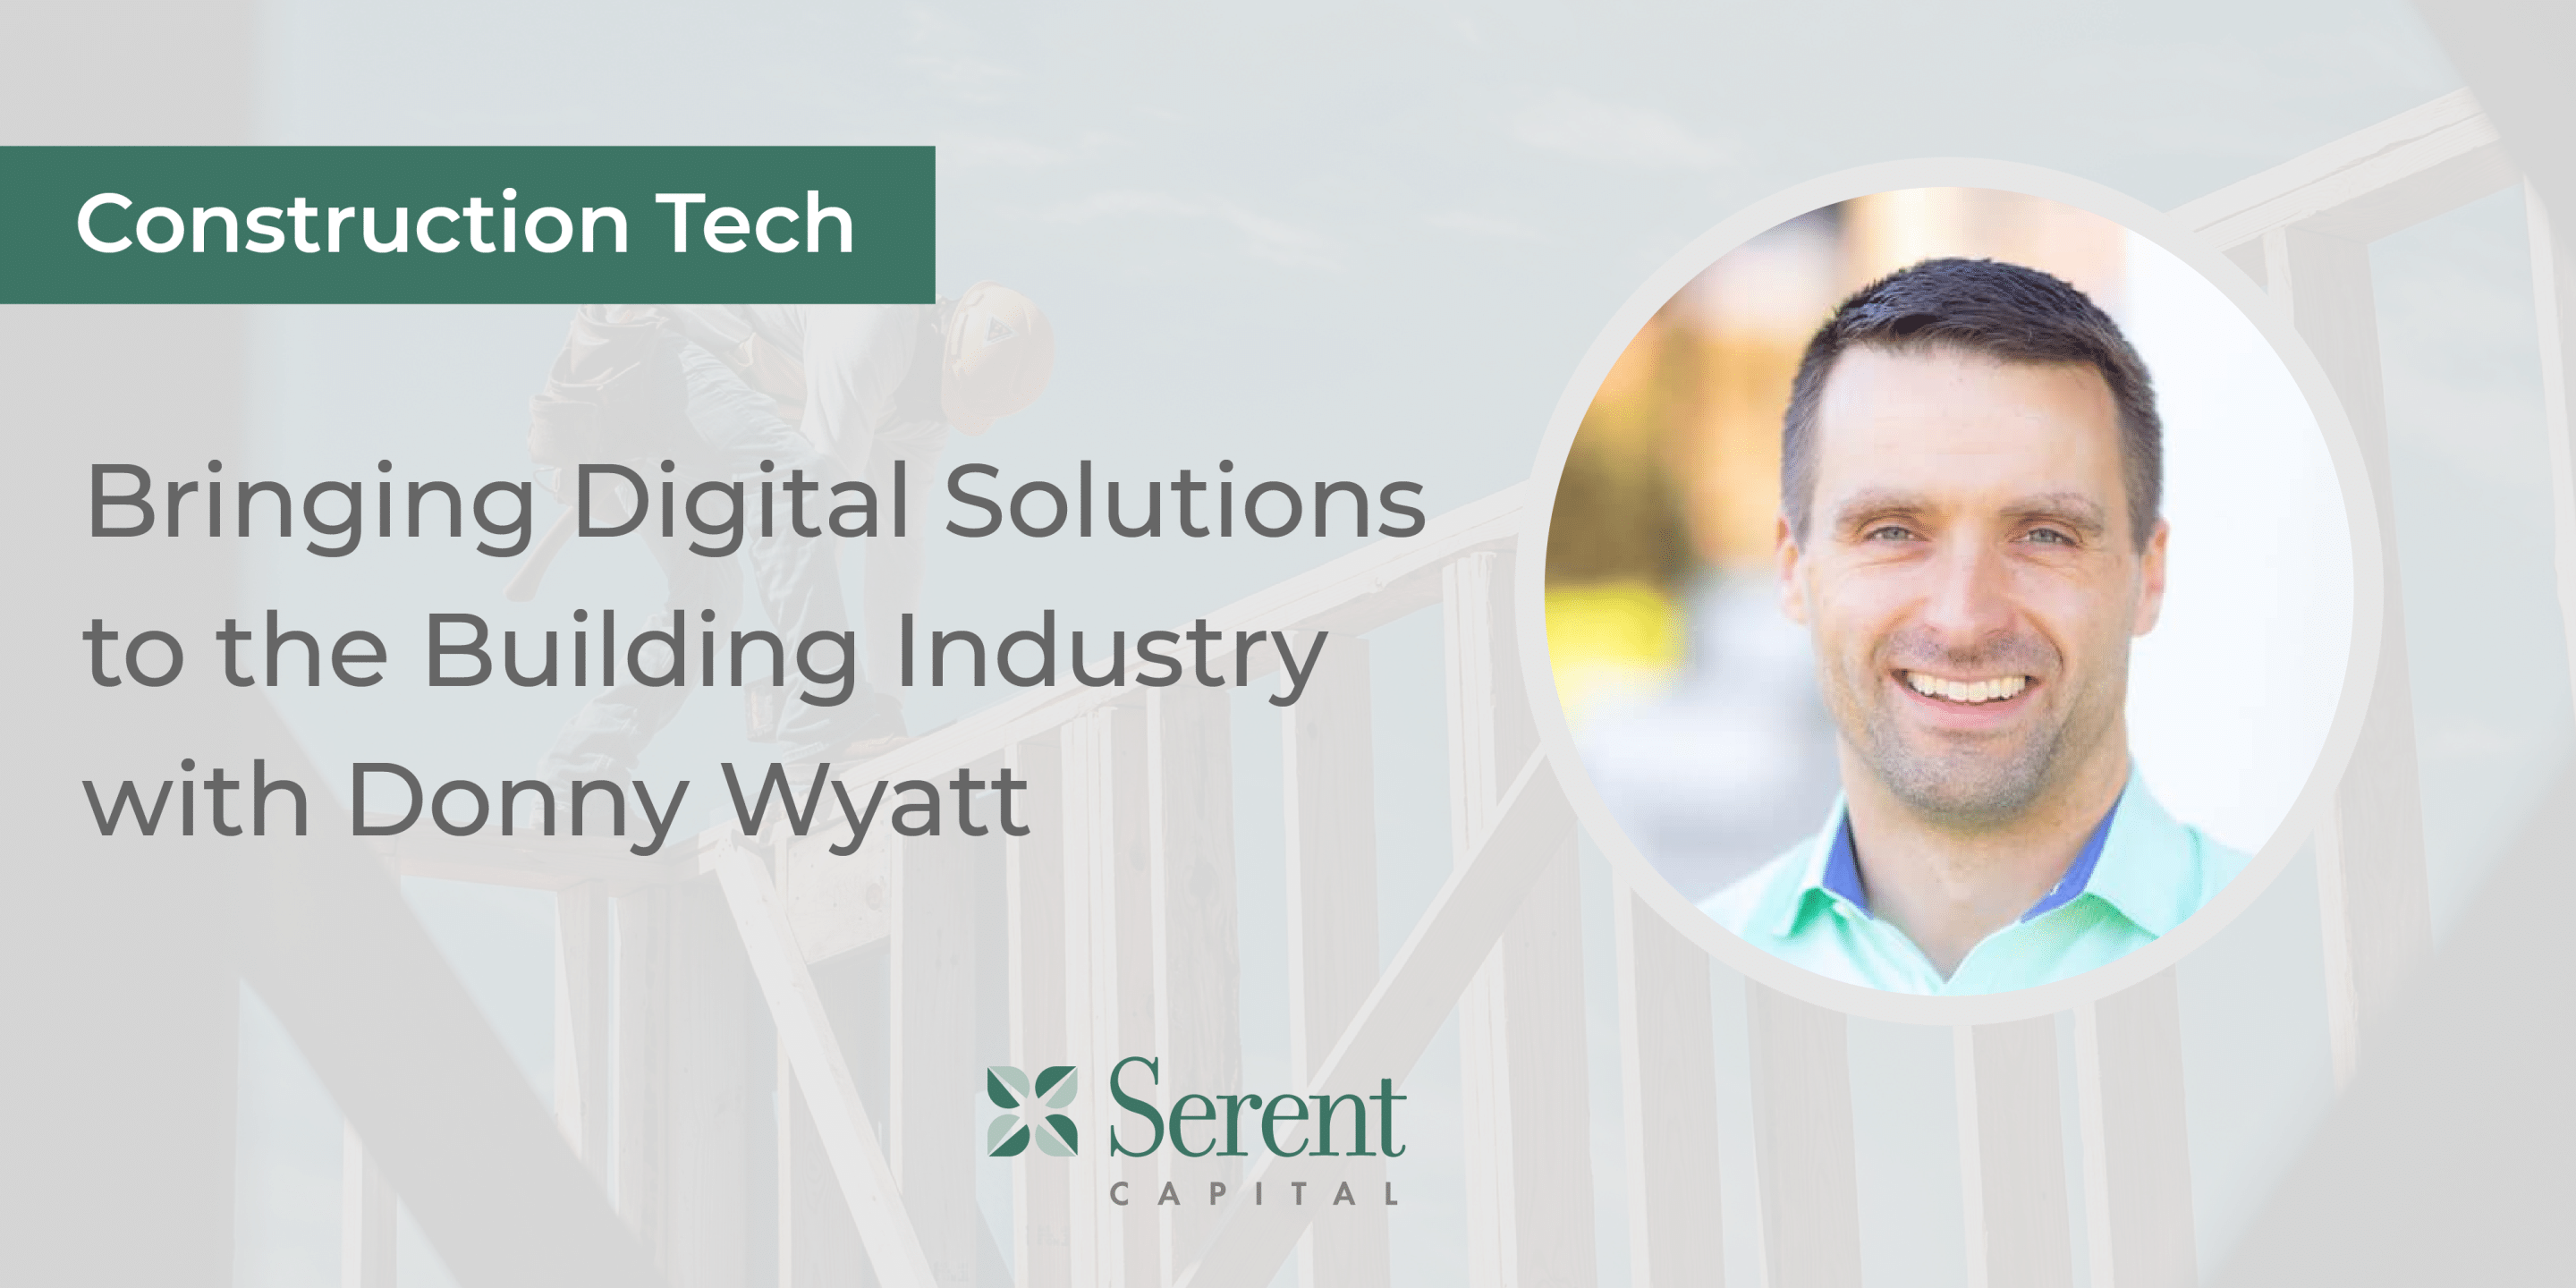 Construction Tech: Bringing Digital Solutions to the Building Industry